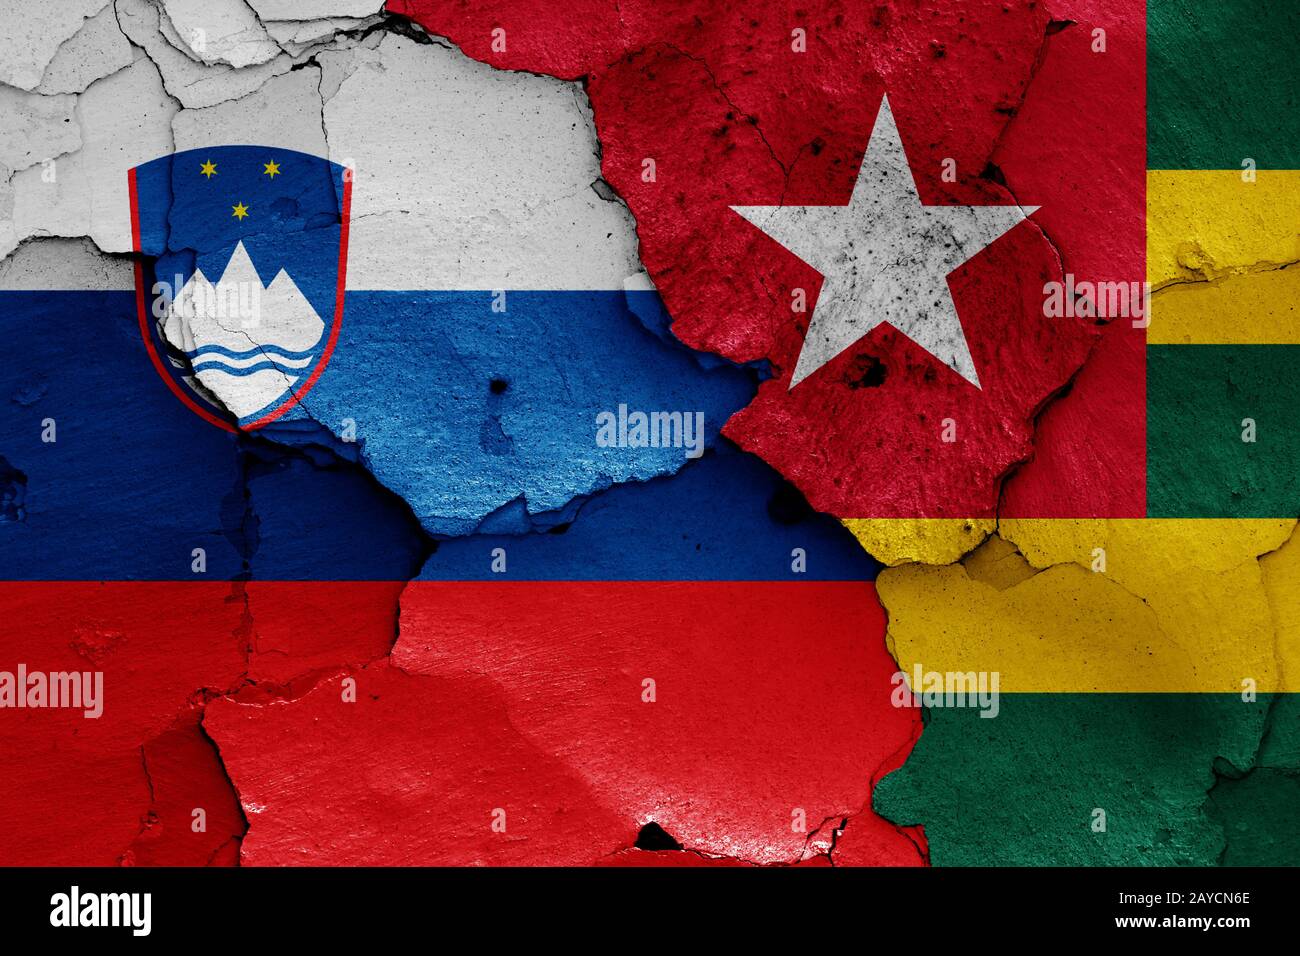 flags of Slovenia and Togo painted on cracked wall Stock Photo